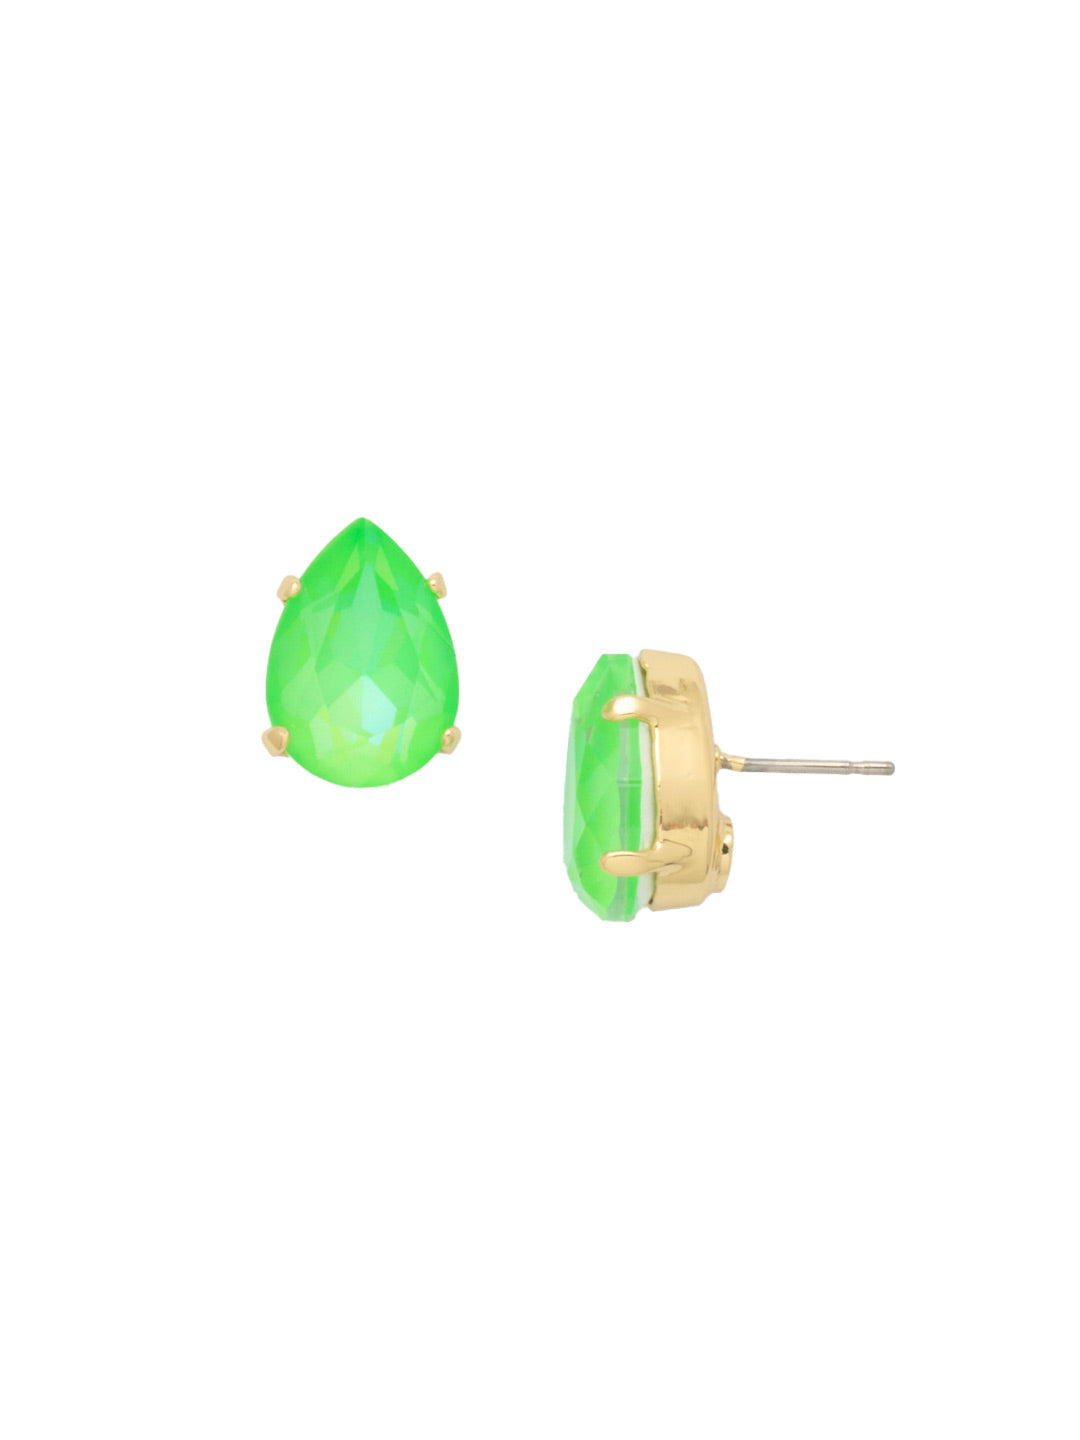 Ginnie Stud Earrings - ECR115BGETG - <p>A beautiful basic stud. These classic single teardrop post earrings are perfect for any occasion, especially the everyday look. A timeless treasure that will sparkle season after season. From Sorrelli's Electric Green  collection in our Bright Gold-tone finish.</p>